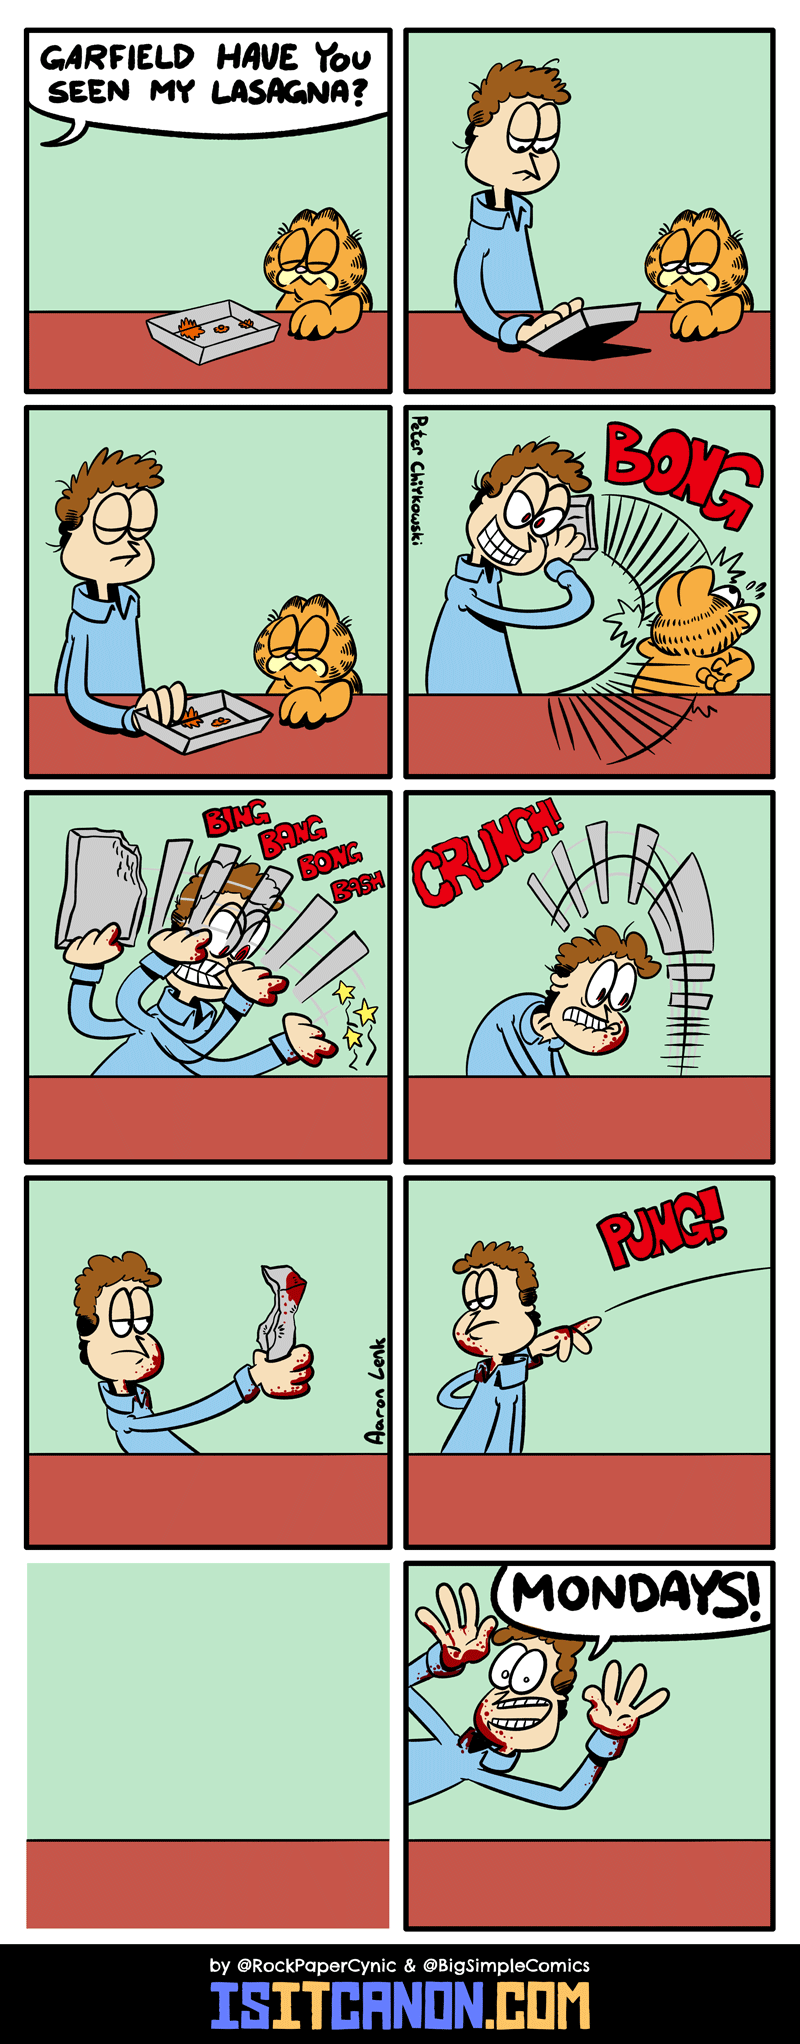 I let the demented artist take over writing the comic and running the site for April Fools Day. Here is what he made me post. Jon beating Garfield to death with a lasagna pan.